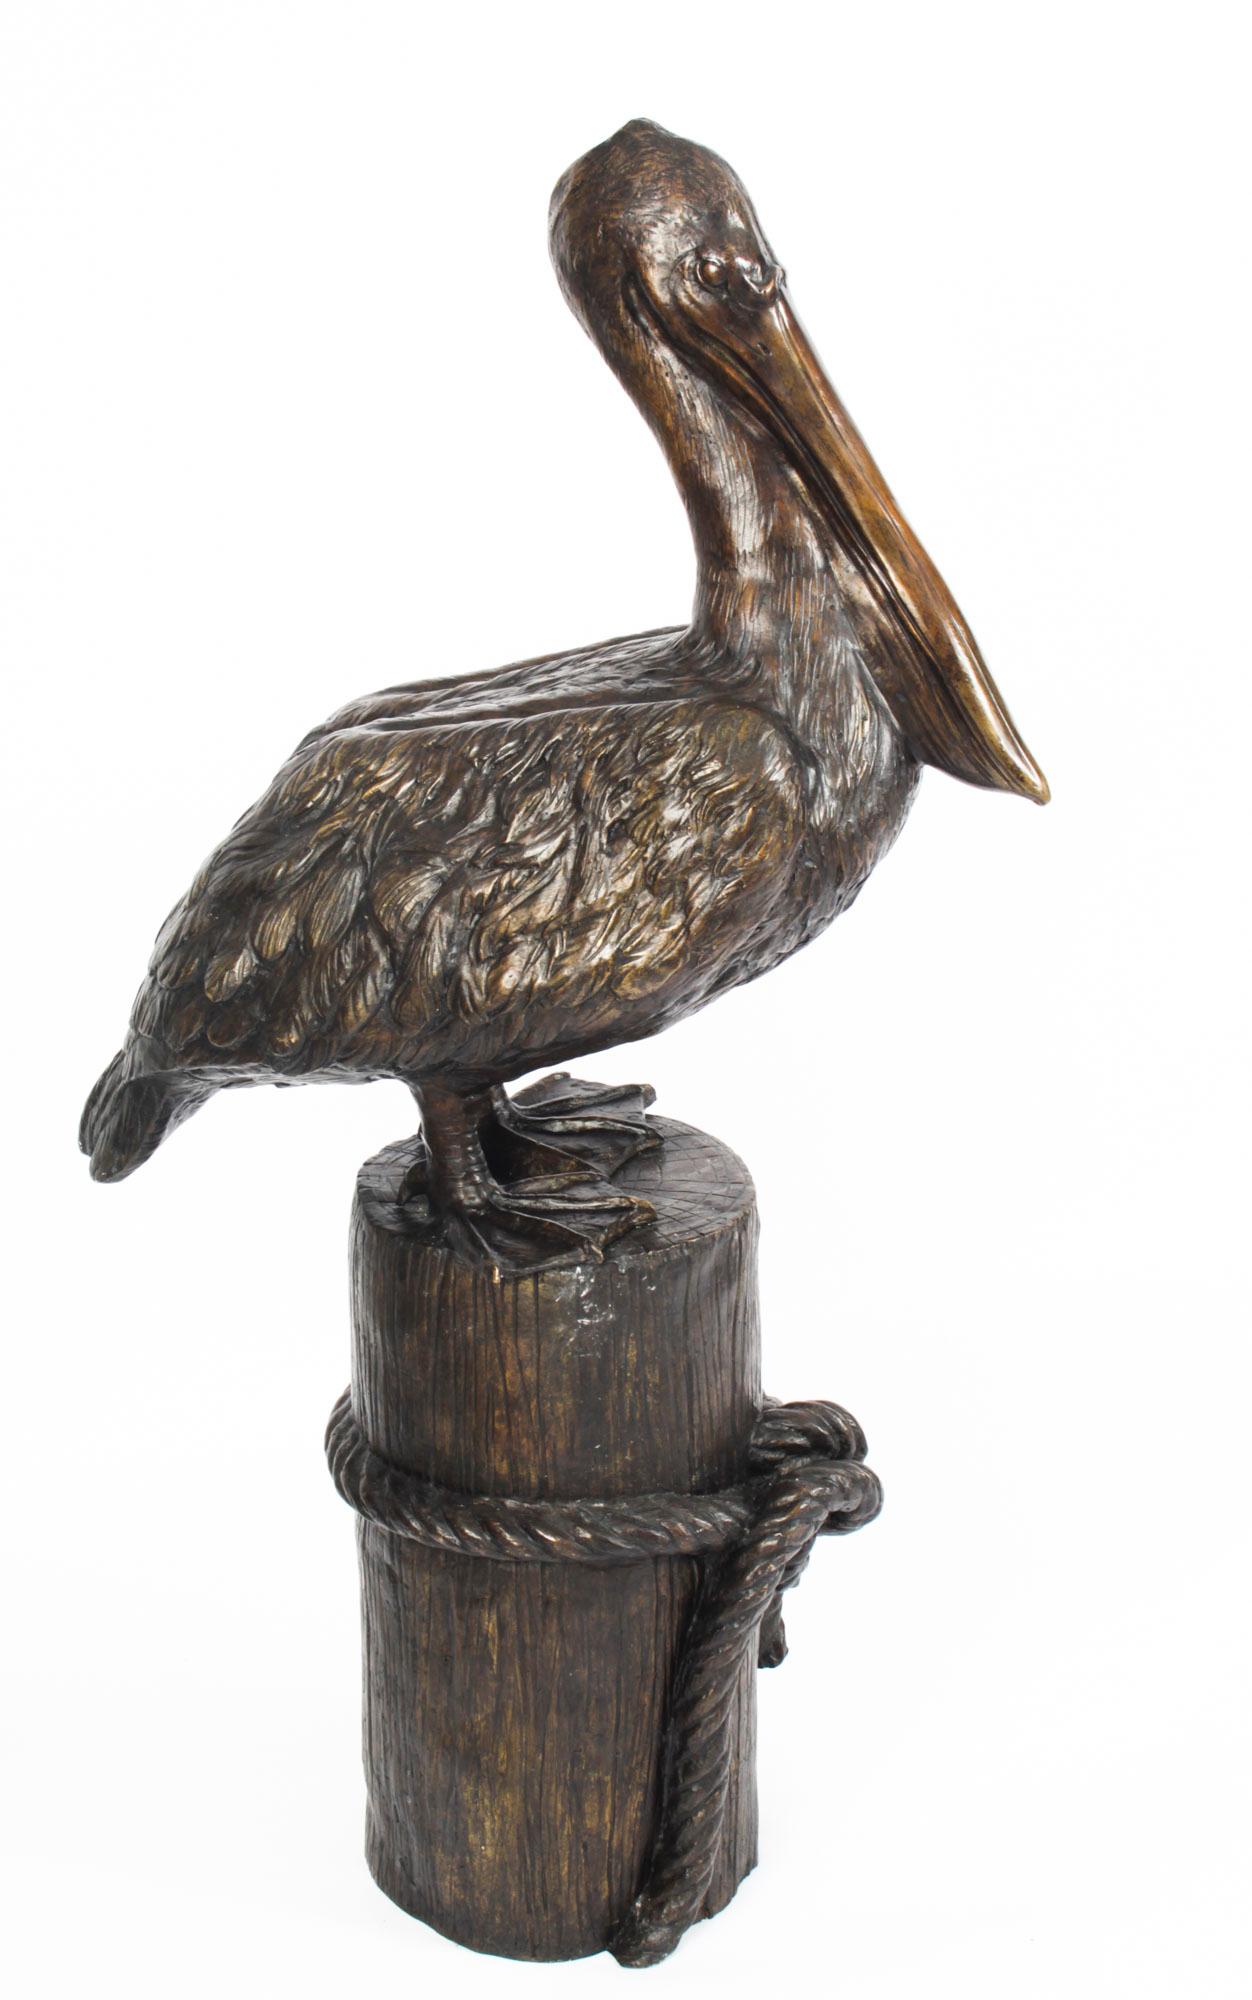 This is a splendid large pair of solid bronze pelicans on mooring posts, dating from the late 20th century.

This charming pair feature one pelican sitting and one standing tall, each on a mooring post with rope entwined around it. 

This